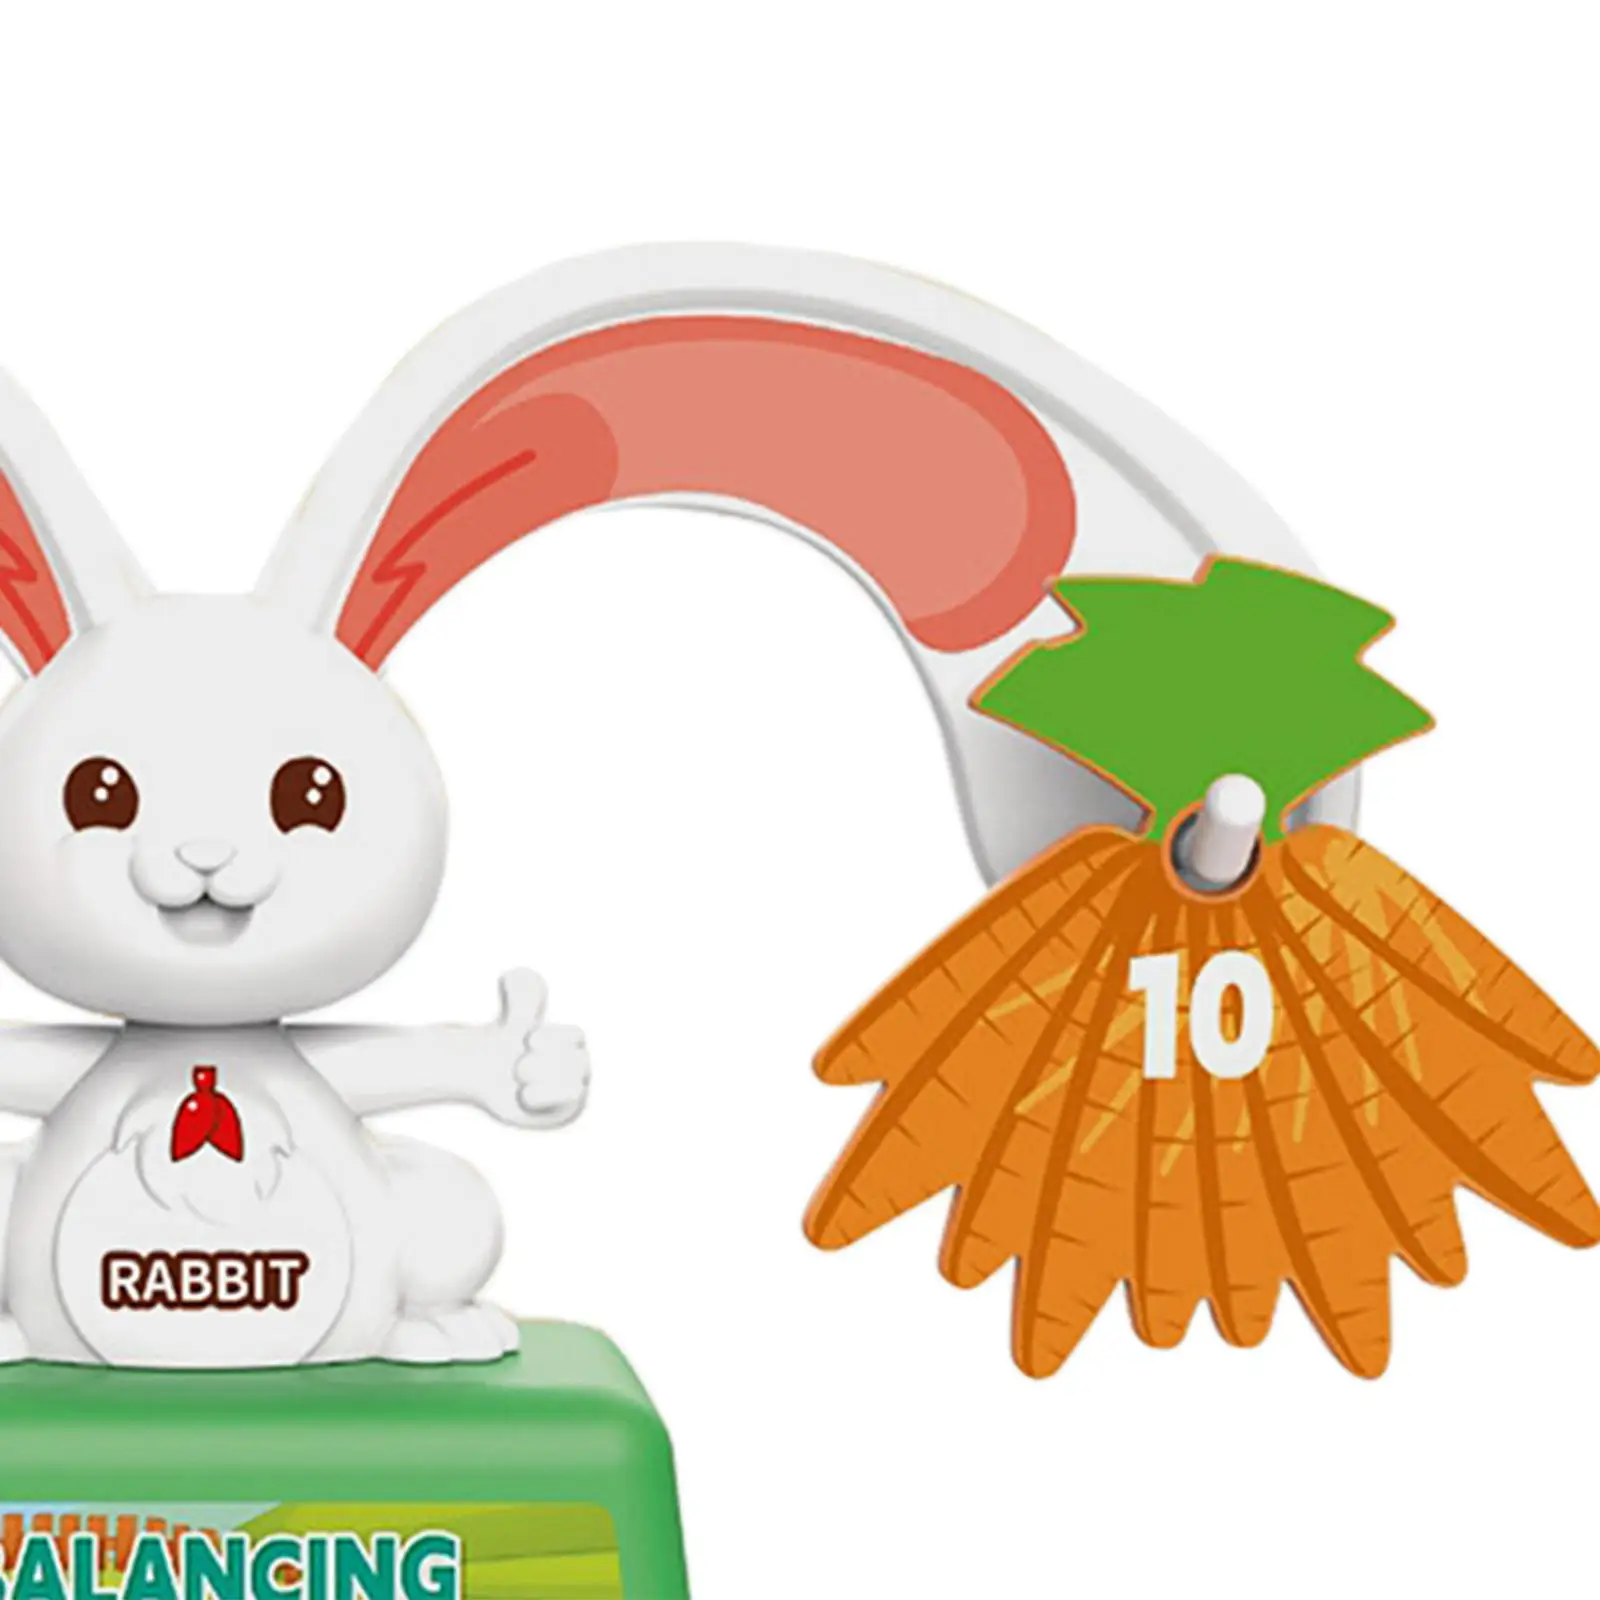 Rabbit Balance Counting Game Math Subtracting and Addition for Children